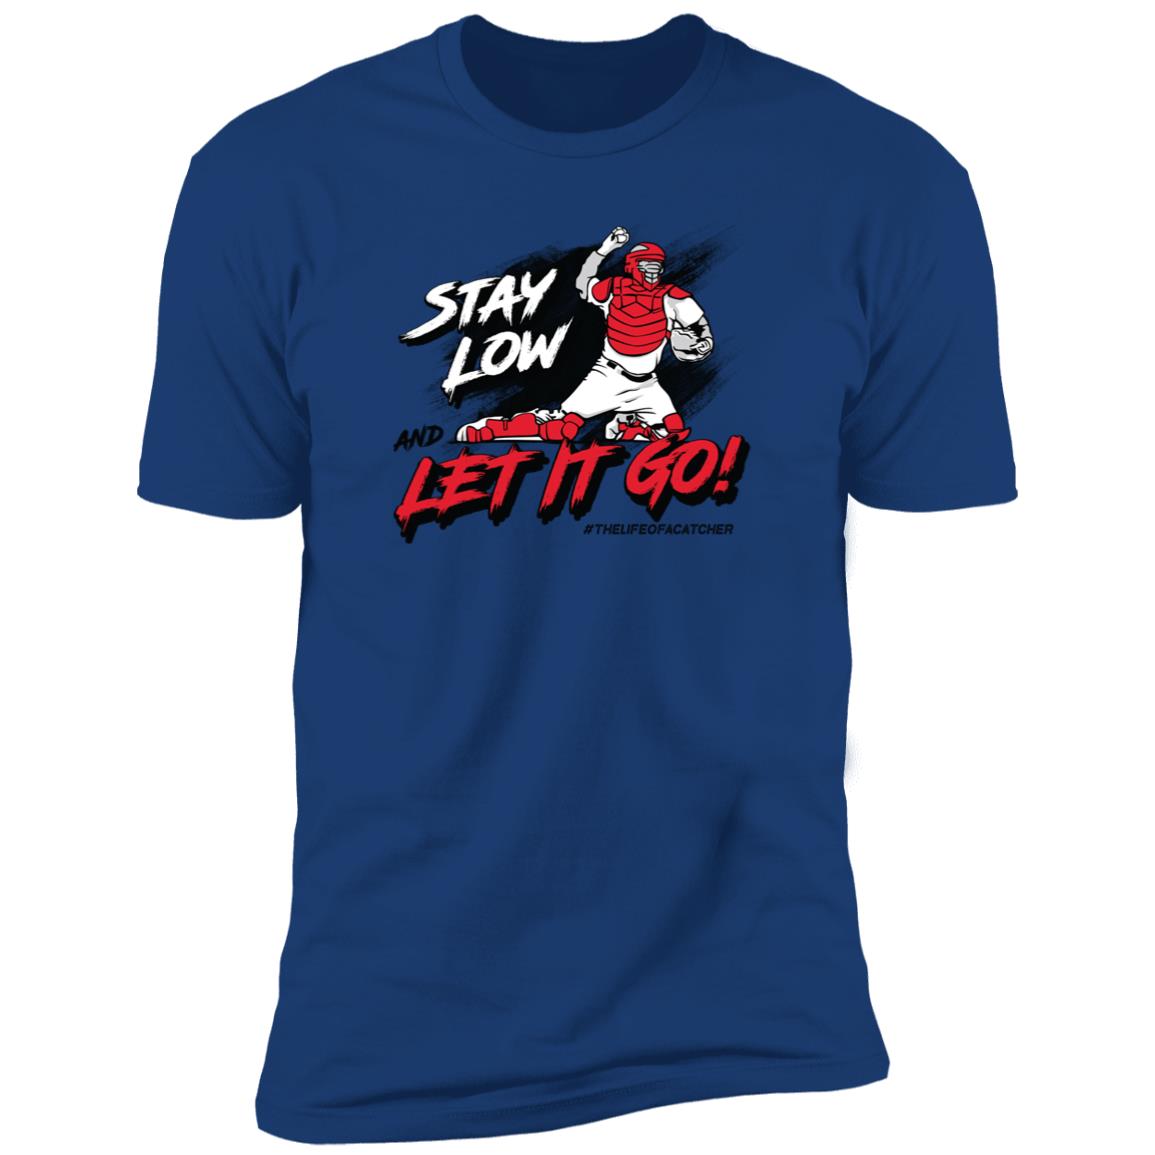 Stay Low & Let It Go Short Sleeve Tee - Blue